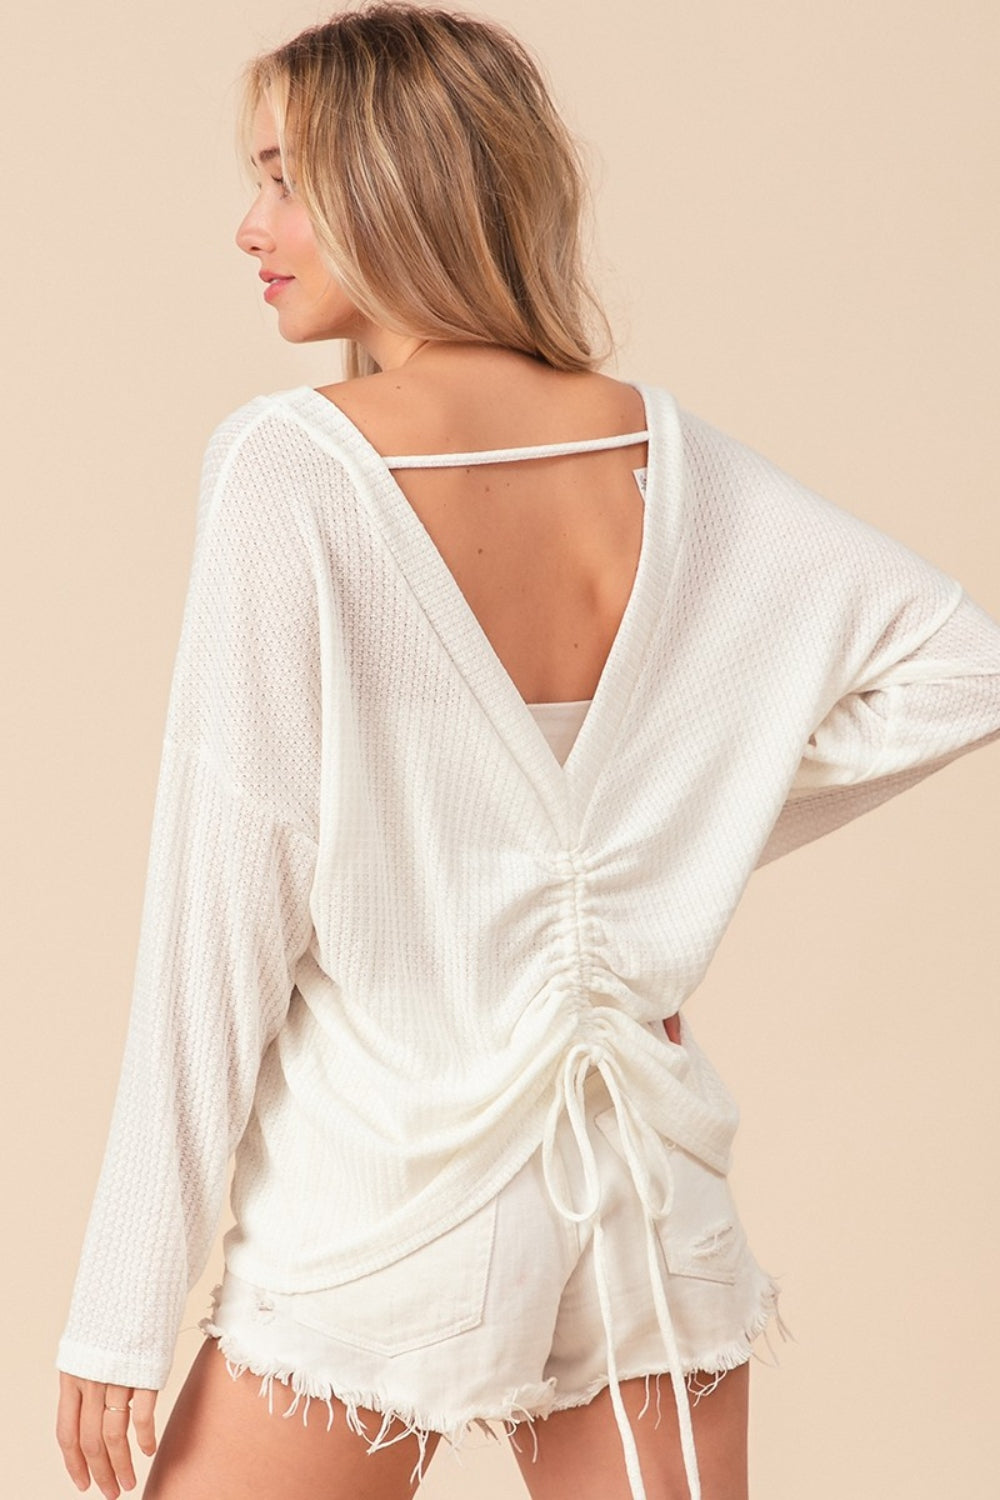 BiBi Waffled Backless Drawstring T-Shirt-110 Long Sleeve Tops-Inspired by Justeen-Women's Clothing Boutique in Chicago, Illinois